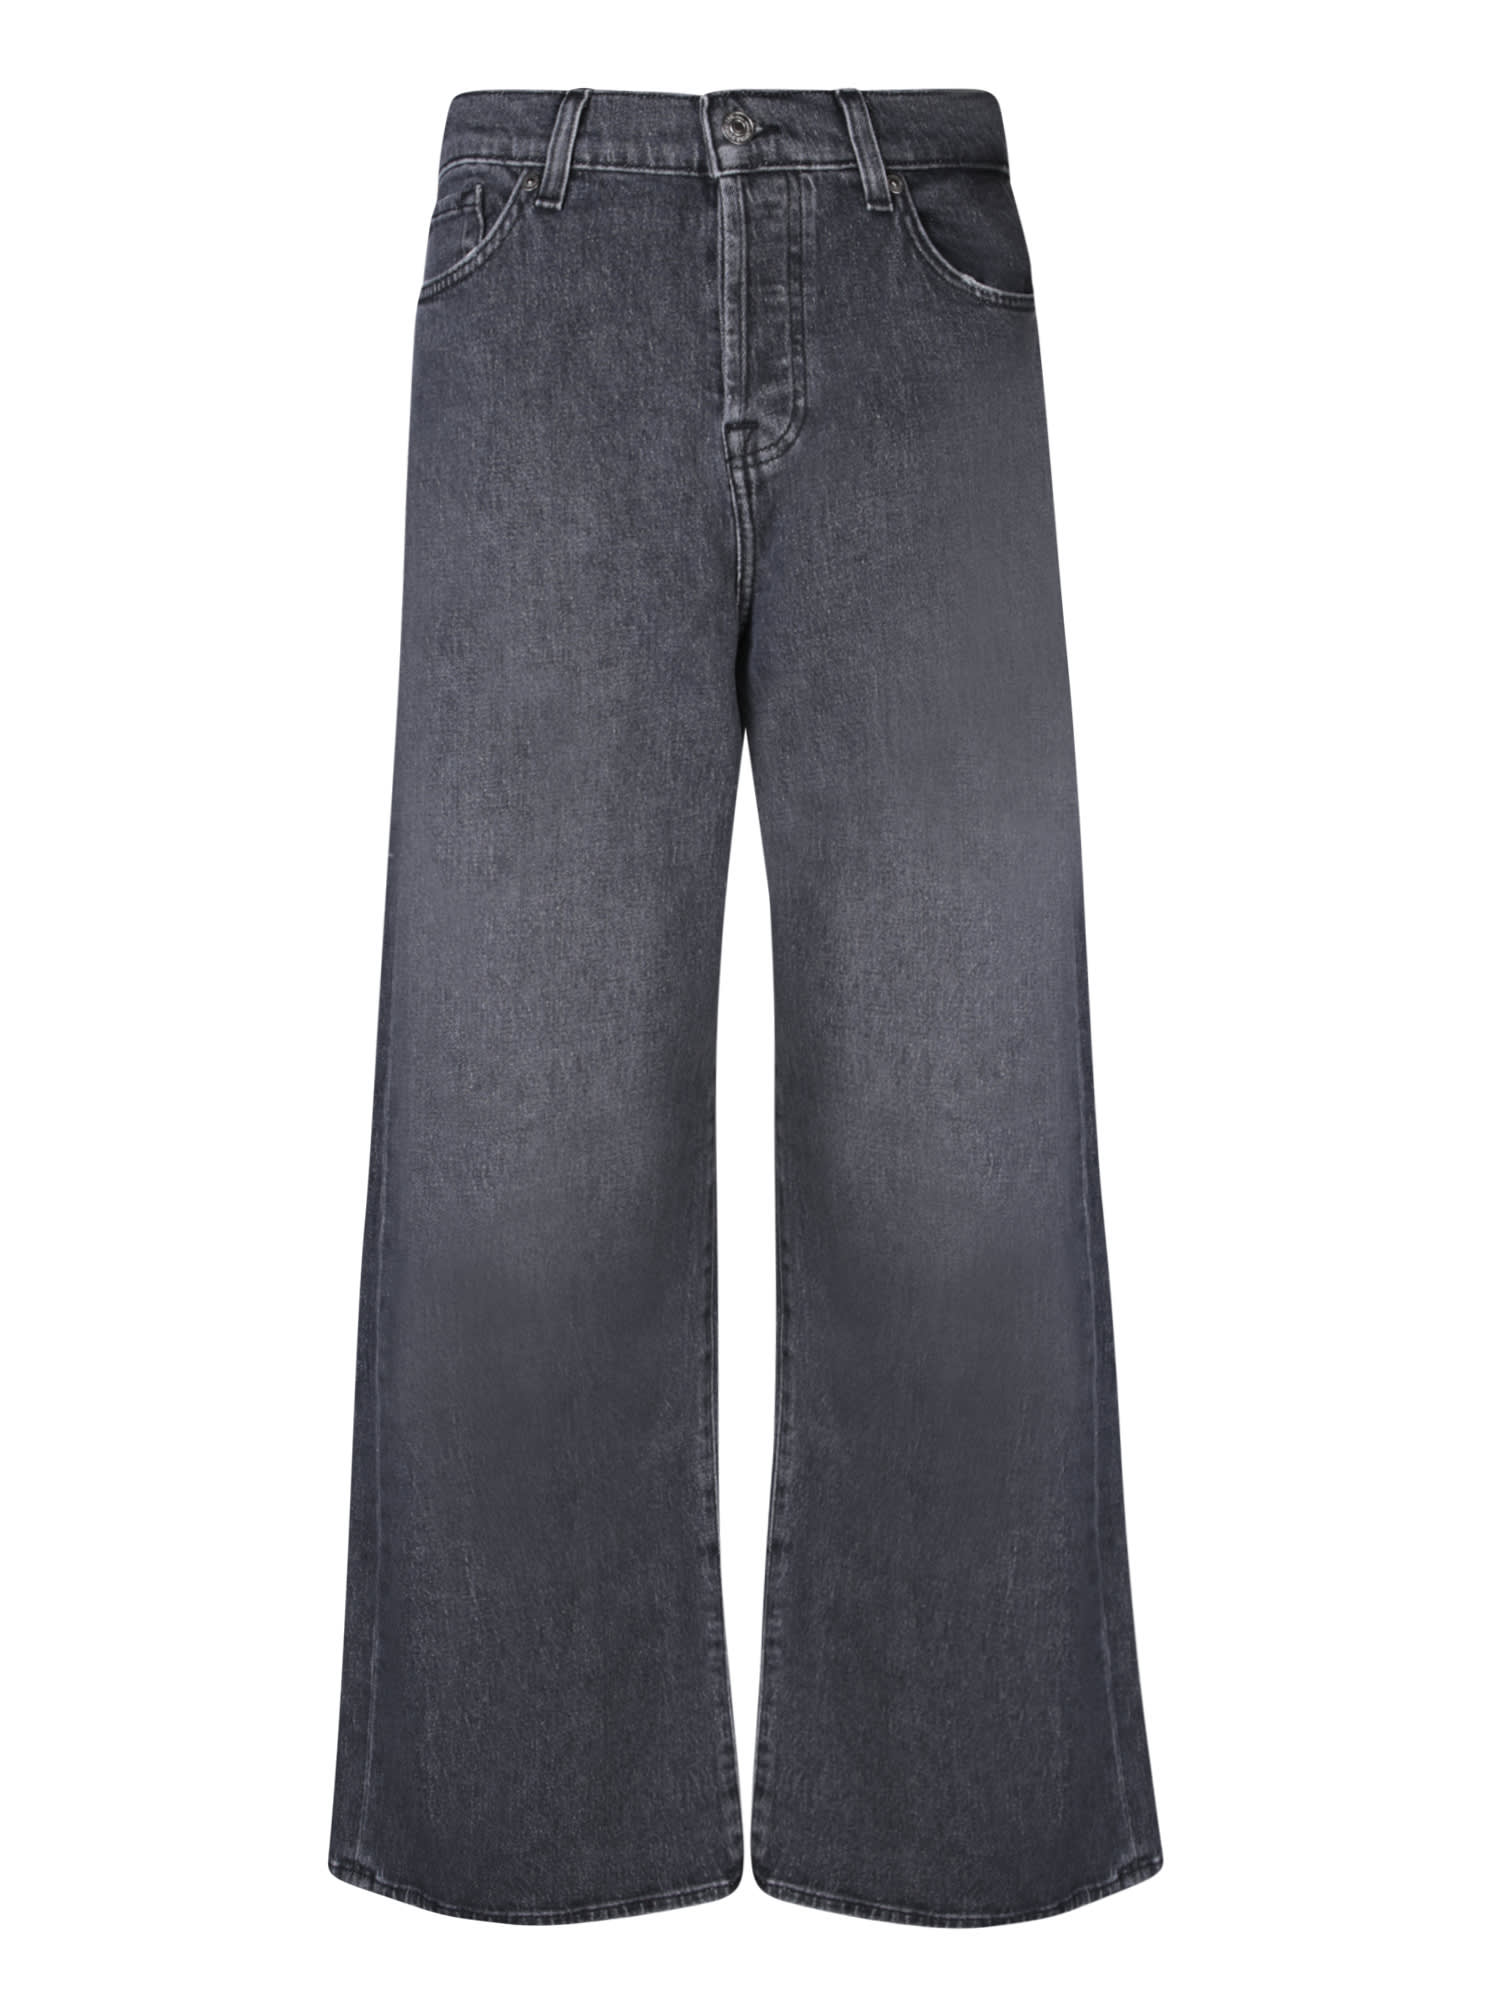 Shop 7 For All Mankind Zoey Grey Jeans